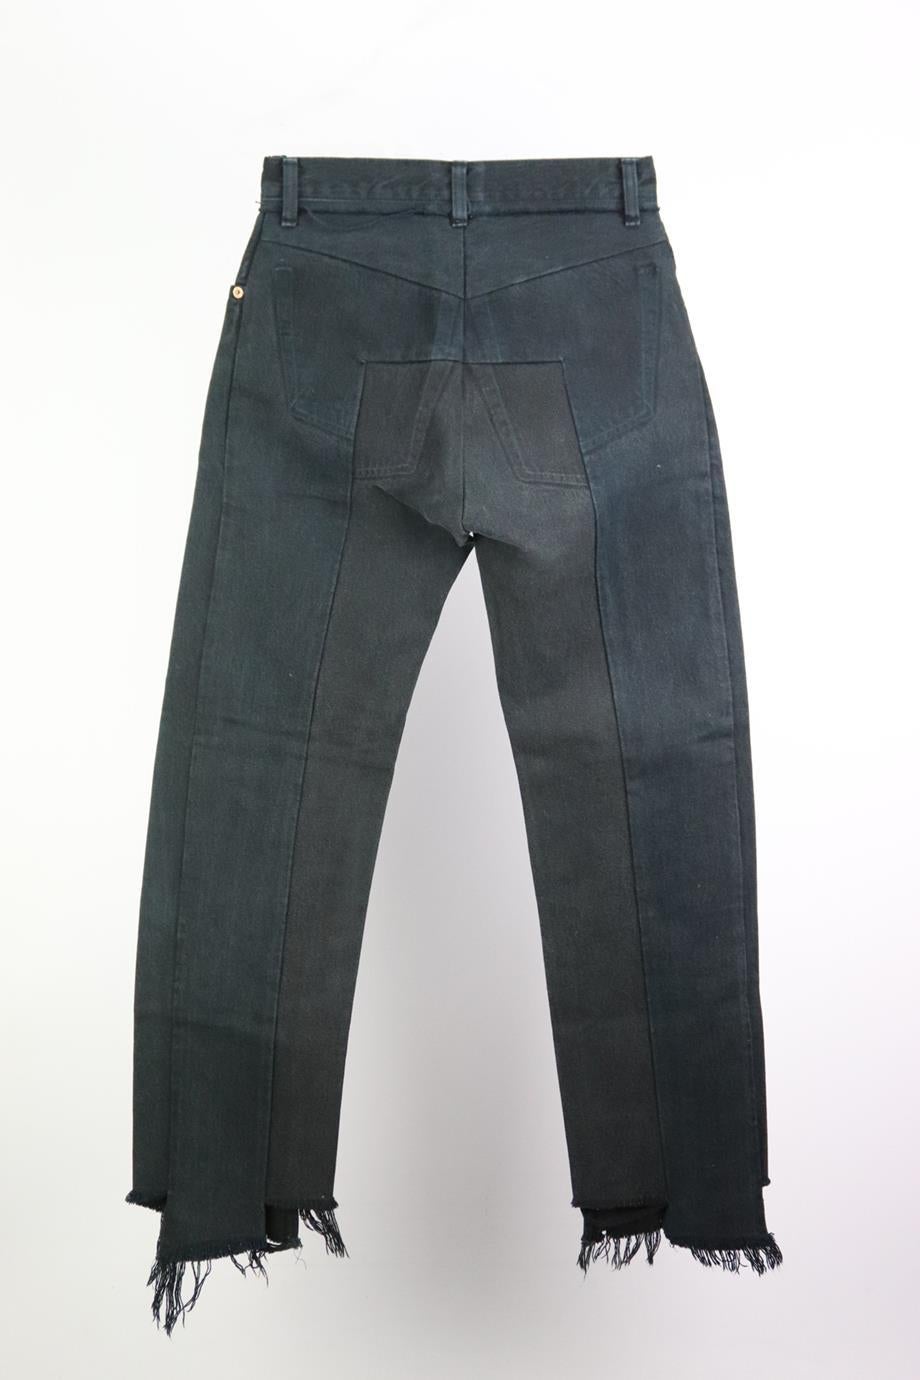 Vetements + Levi’s high rise straight leg jeans. Made from panelled faded black denim in a mid-rise straight-leg fit. Black. Button and zip fastening at front. 100% Cotton. Size: XSmall (UK 6, US 2, FR 34, IT 38).